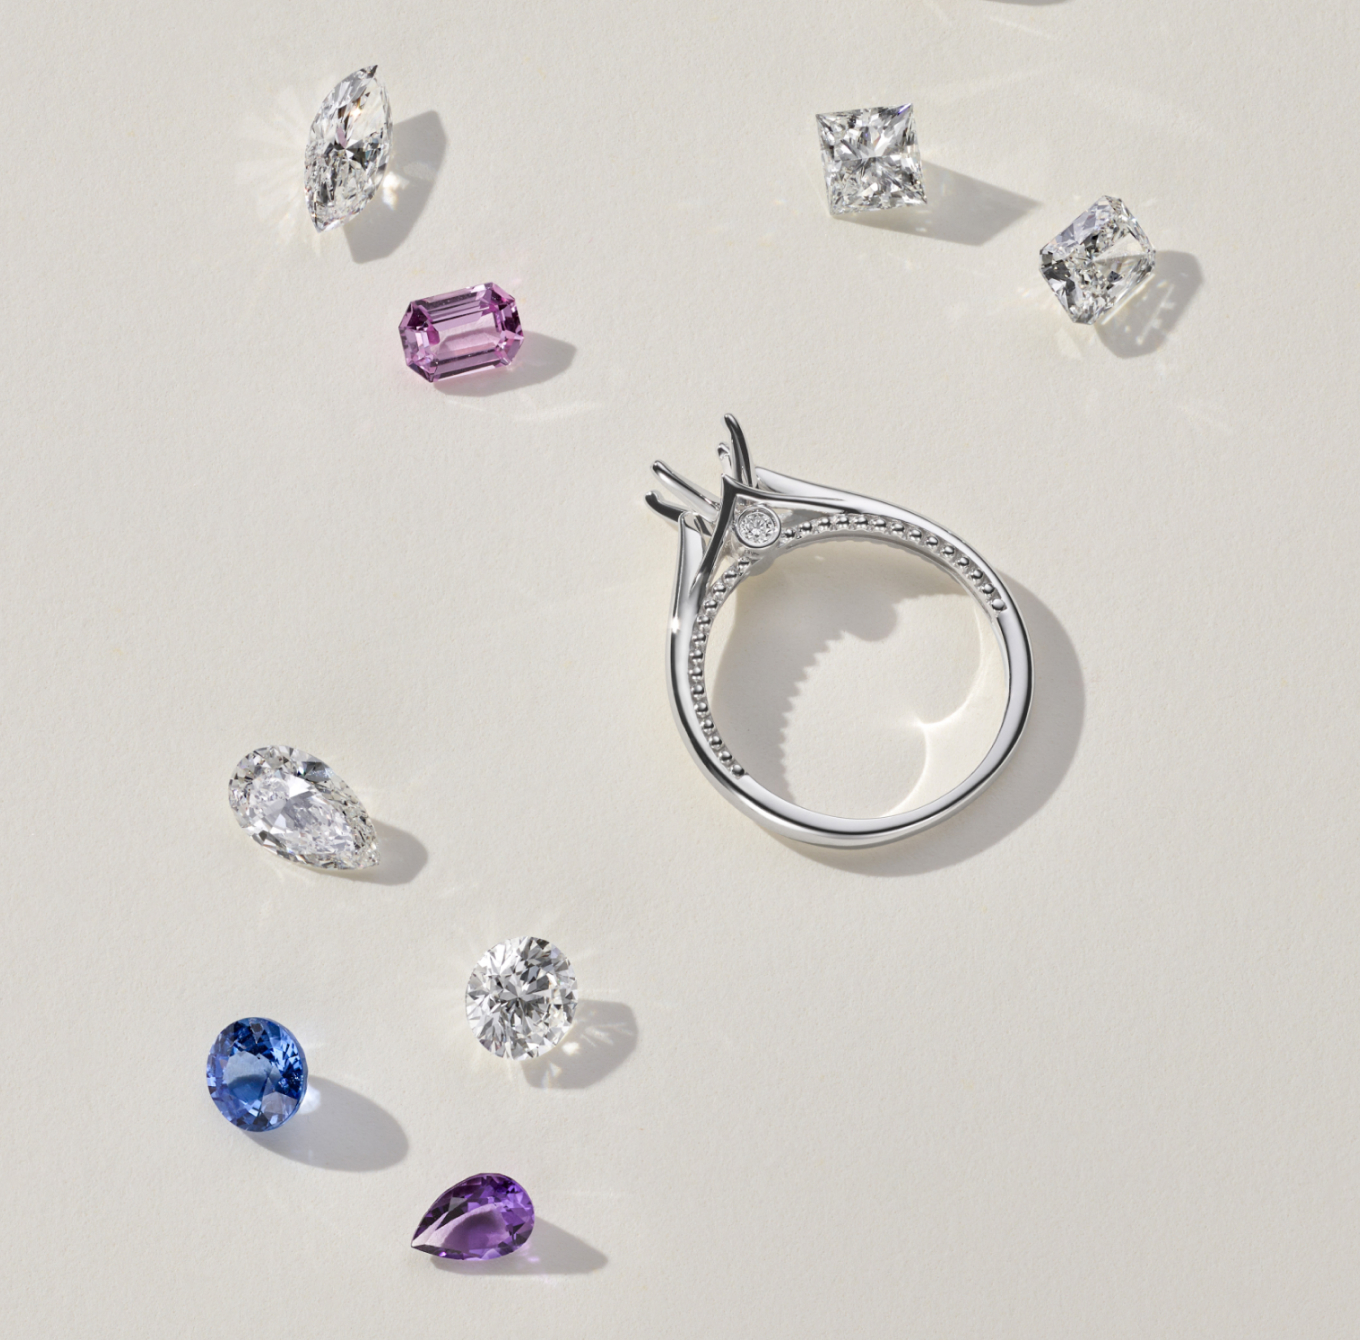 In the center of the image is a solitaire engagement ring. It has a white gold band and a single, round diamond in a prong setting. The diamond is likely cut in a brilliant round cut, which is the most popular cut for diamonds because it maximizes sparkle. Scattered around the engagement ring are several loose diamonds. These diamonds vary in size and may be used to create a custom engagement ring.

Hidden Milgrain Engagement Ring
This sleek 14-karat white gold engagement ring features a simple top-down view with ornate details hidden along the sides. Milgrain lines the profile, giving way to a natural diamond accent on either side of the setting. Add the center stone of your dreams to complete this elegant design. For more information on selecting your center stone, Live Chat online, call a customer service representative at 1-866-467-4263, or visit one of our store locations.